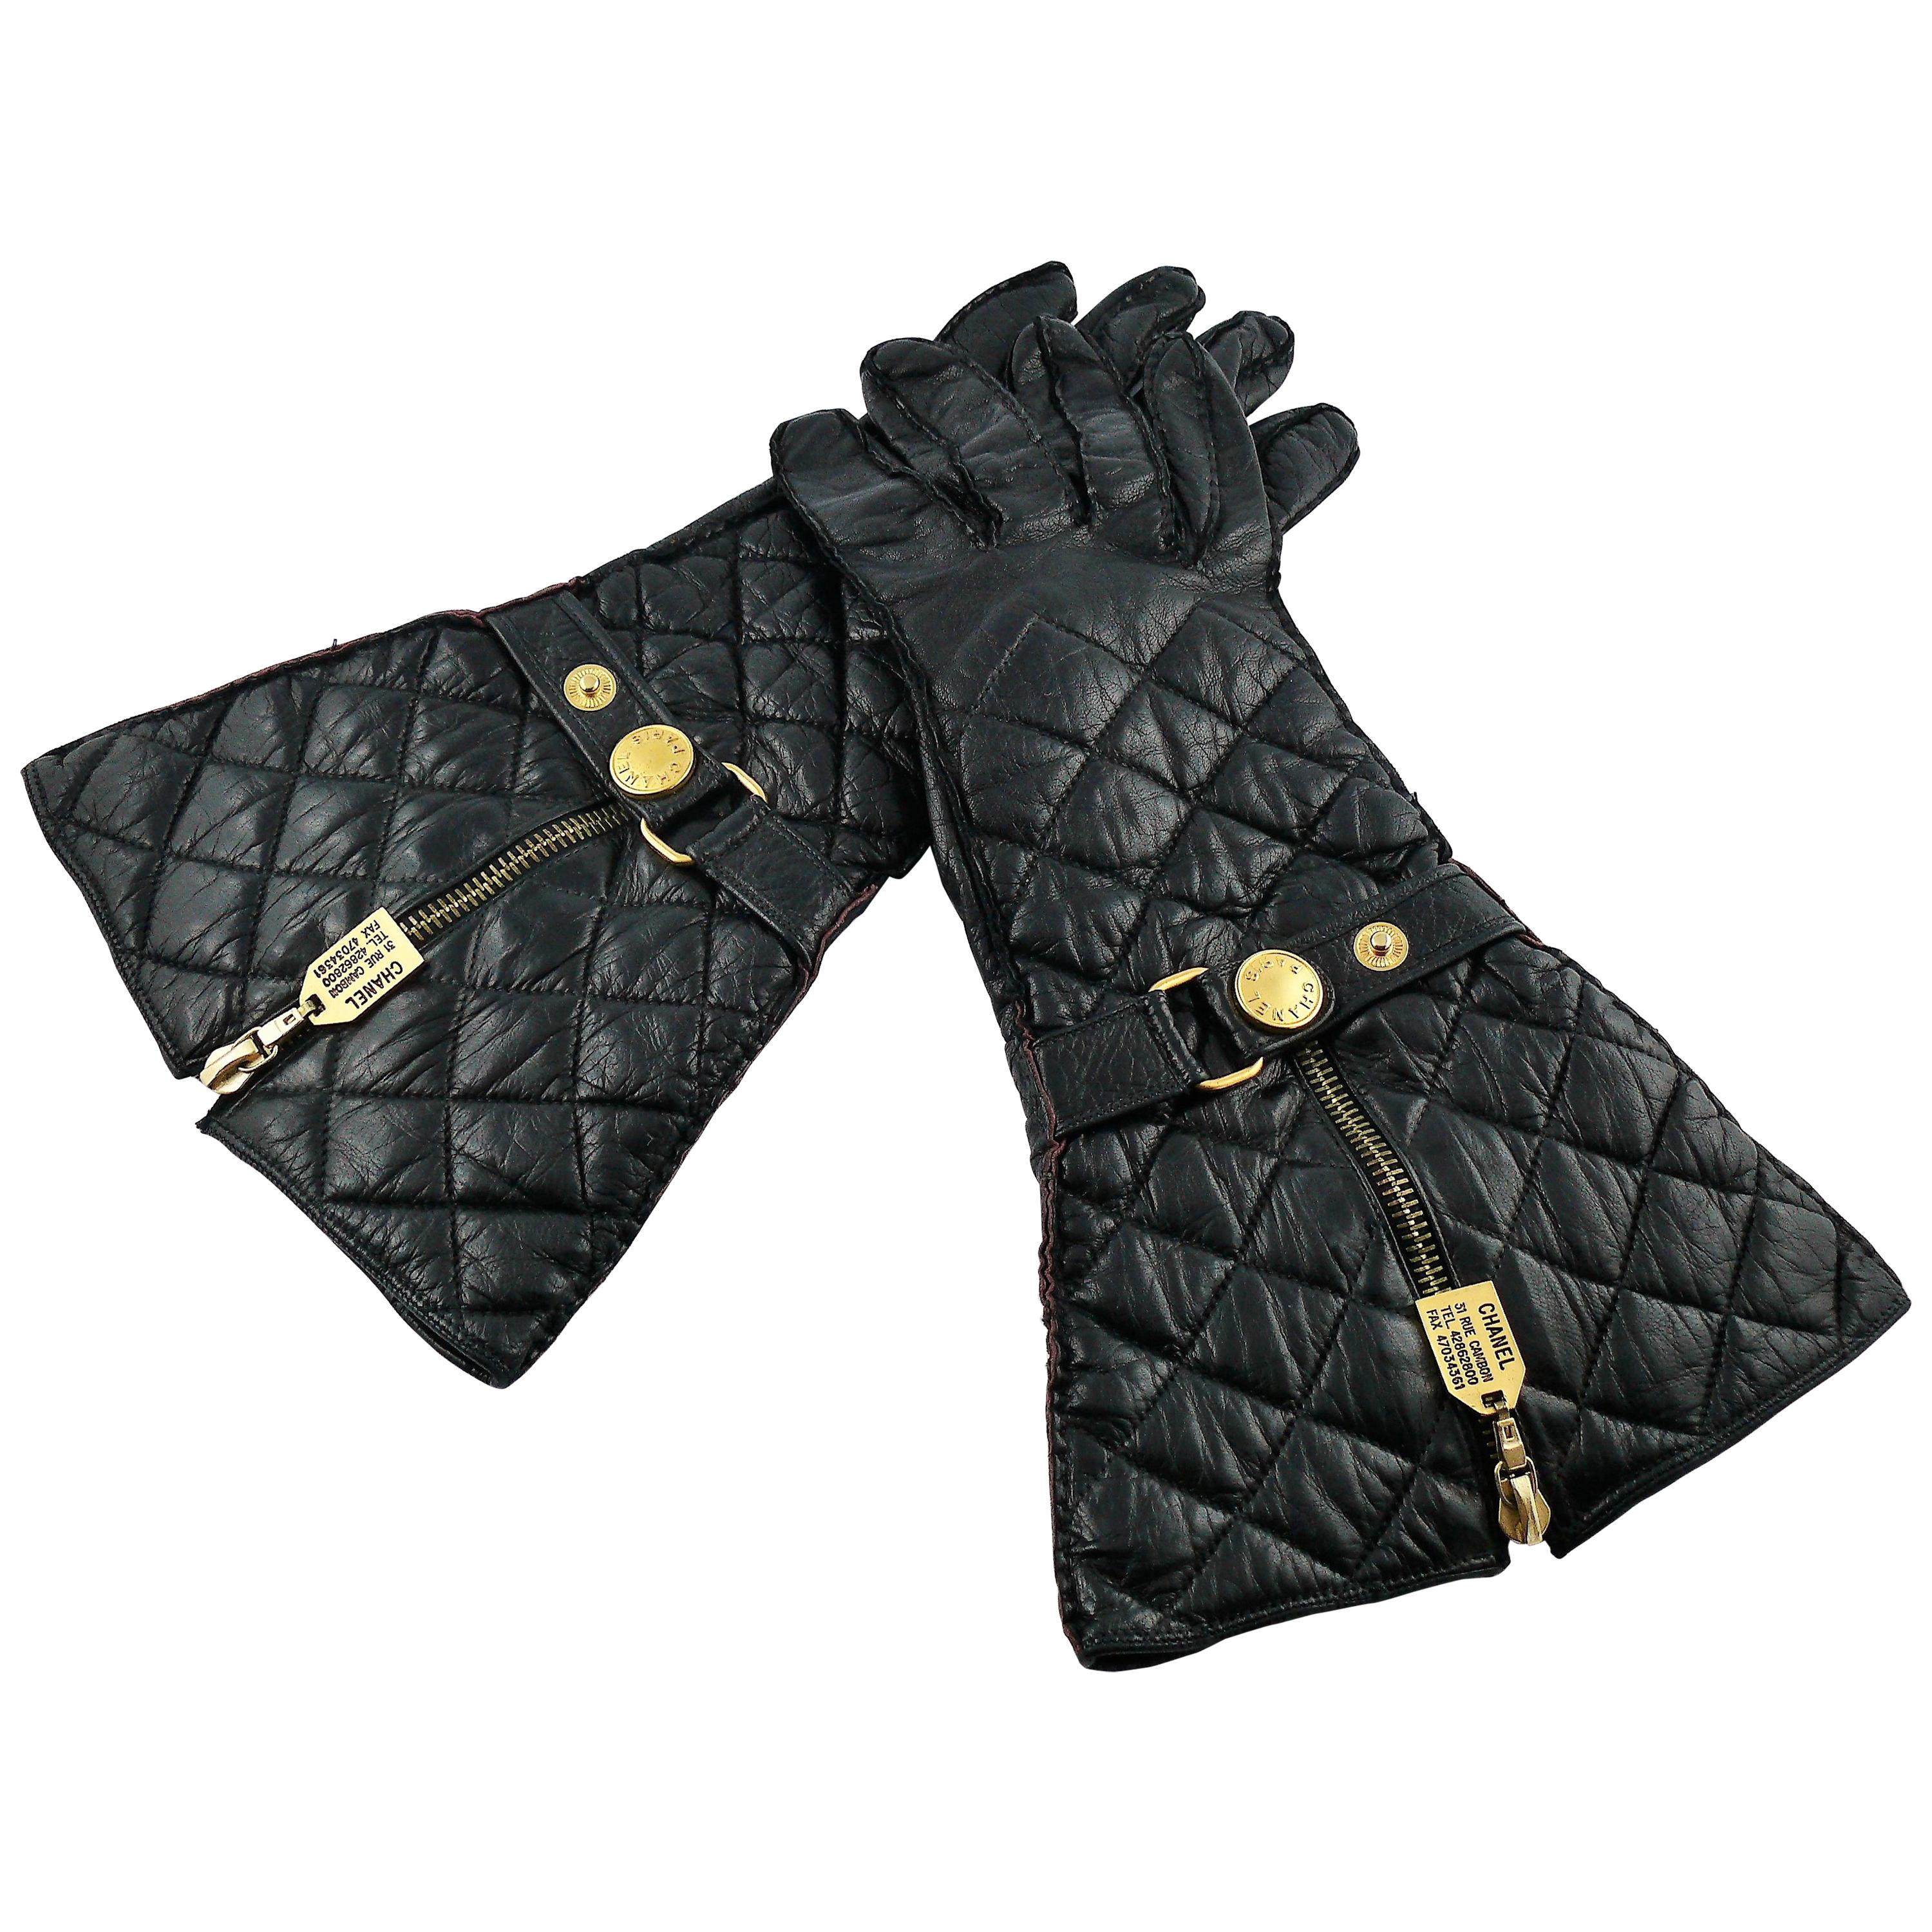 Chanel Vintage Iconic Black Quilted Kidskin Leather Rue Cambon Gloves Size 7 1/2